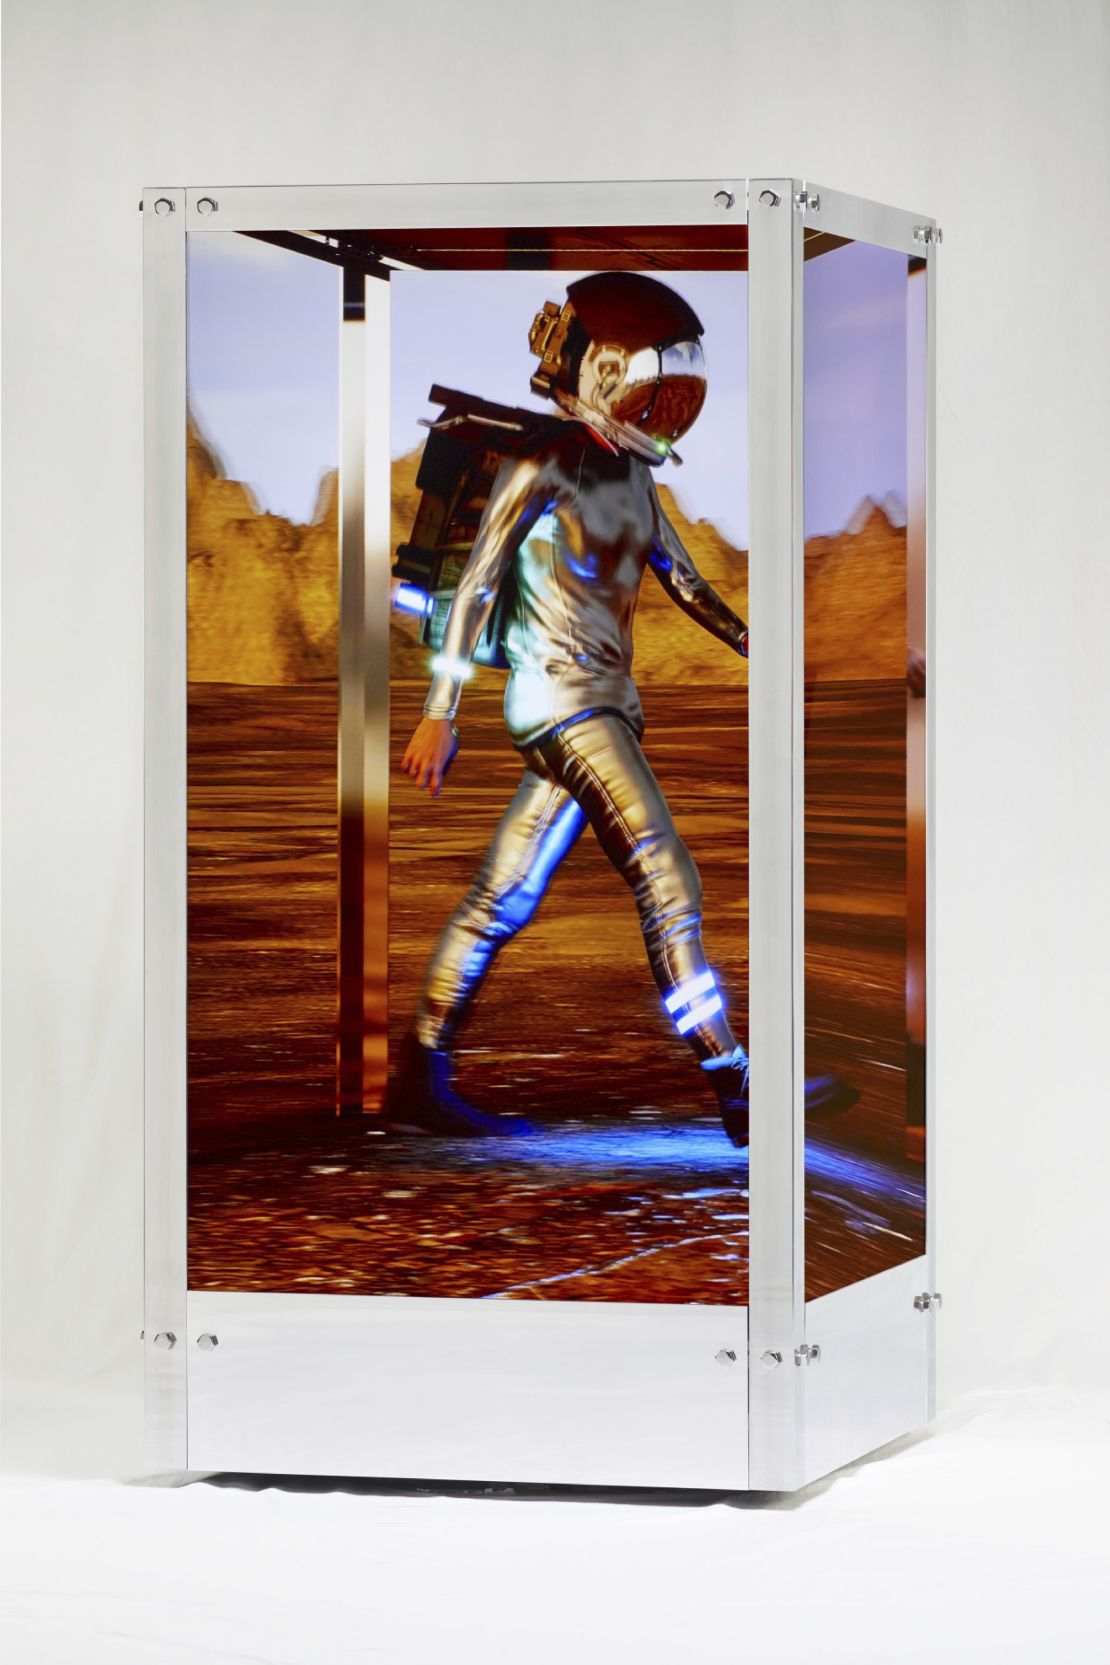 "Human One," by artist Beetle was sold at auction by Christie's in 2021. Separately, Christie's hosted its Art + Tech Summit at Art Dubai this year.